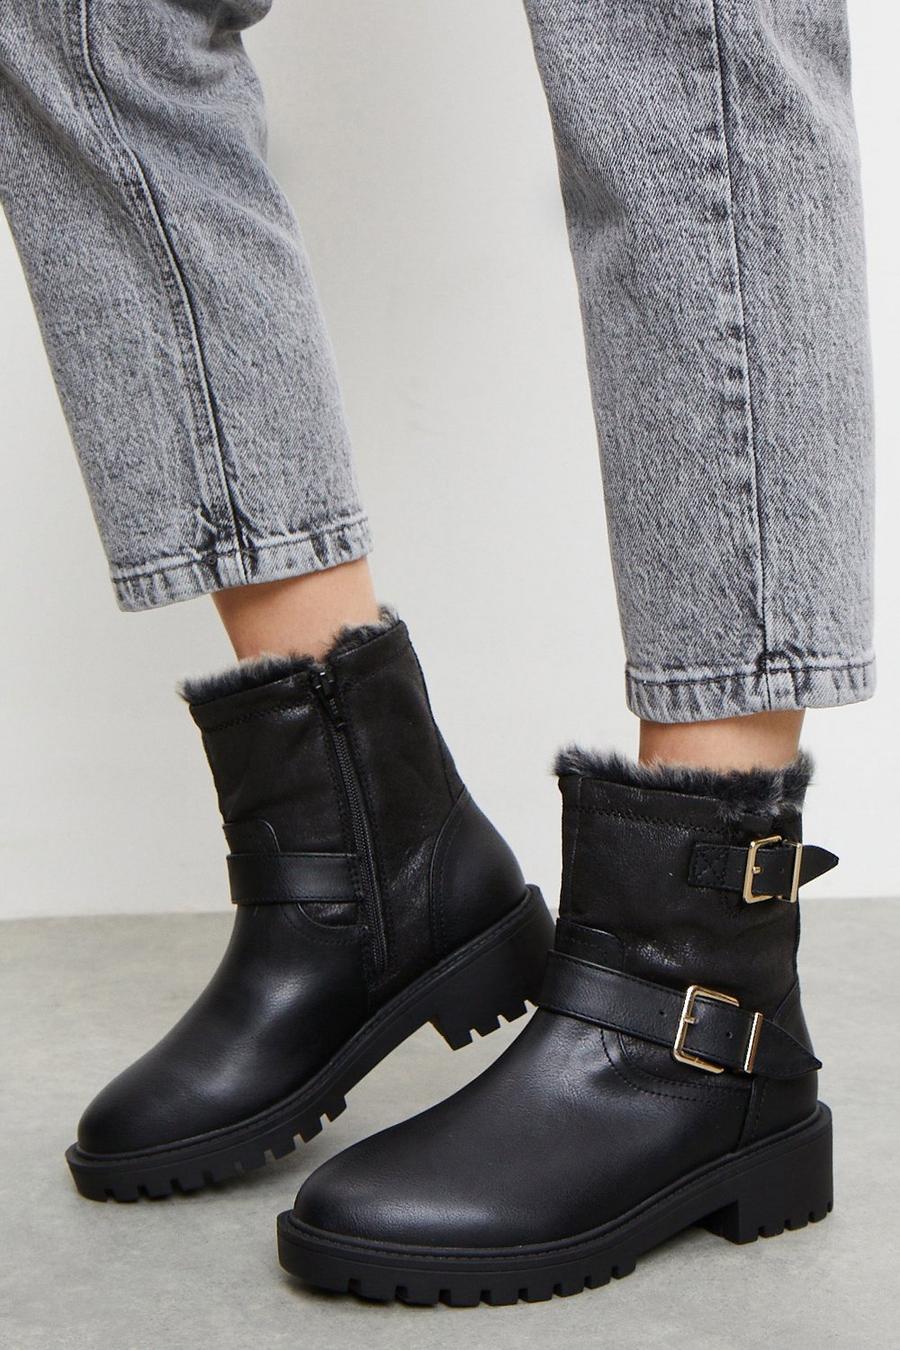 Women S Boots Heeled Ankle Boots Dorothy Perkins